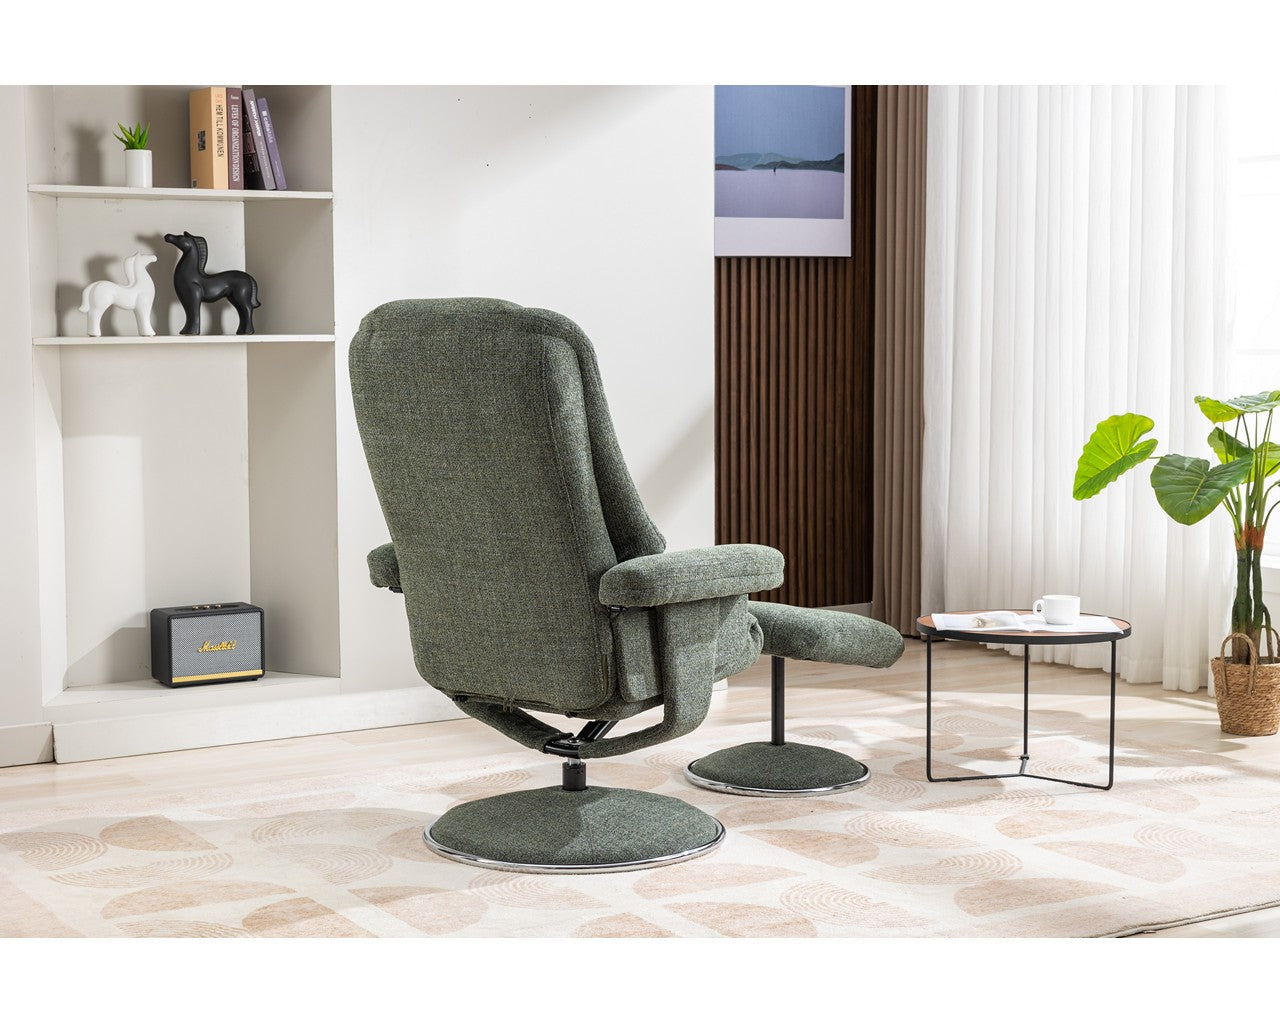 Swivel Recliner Chair Collection - Denver: Chacha Fern